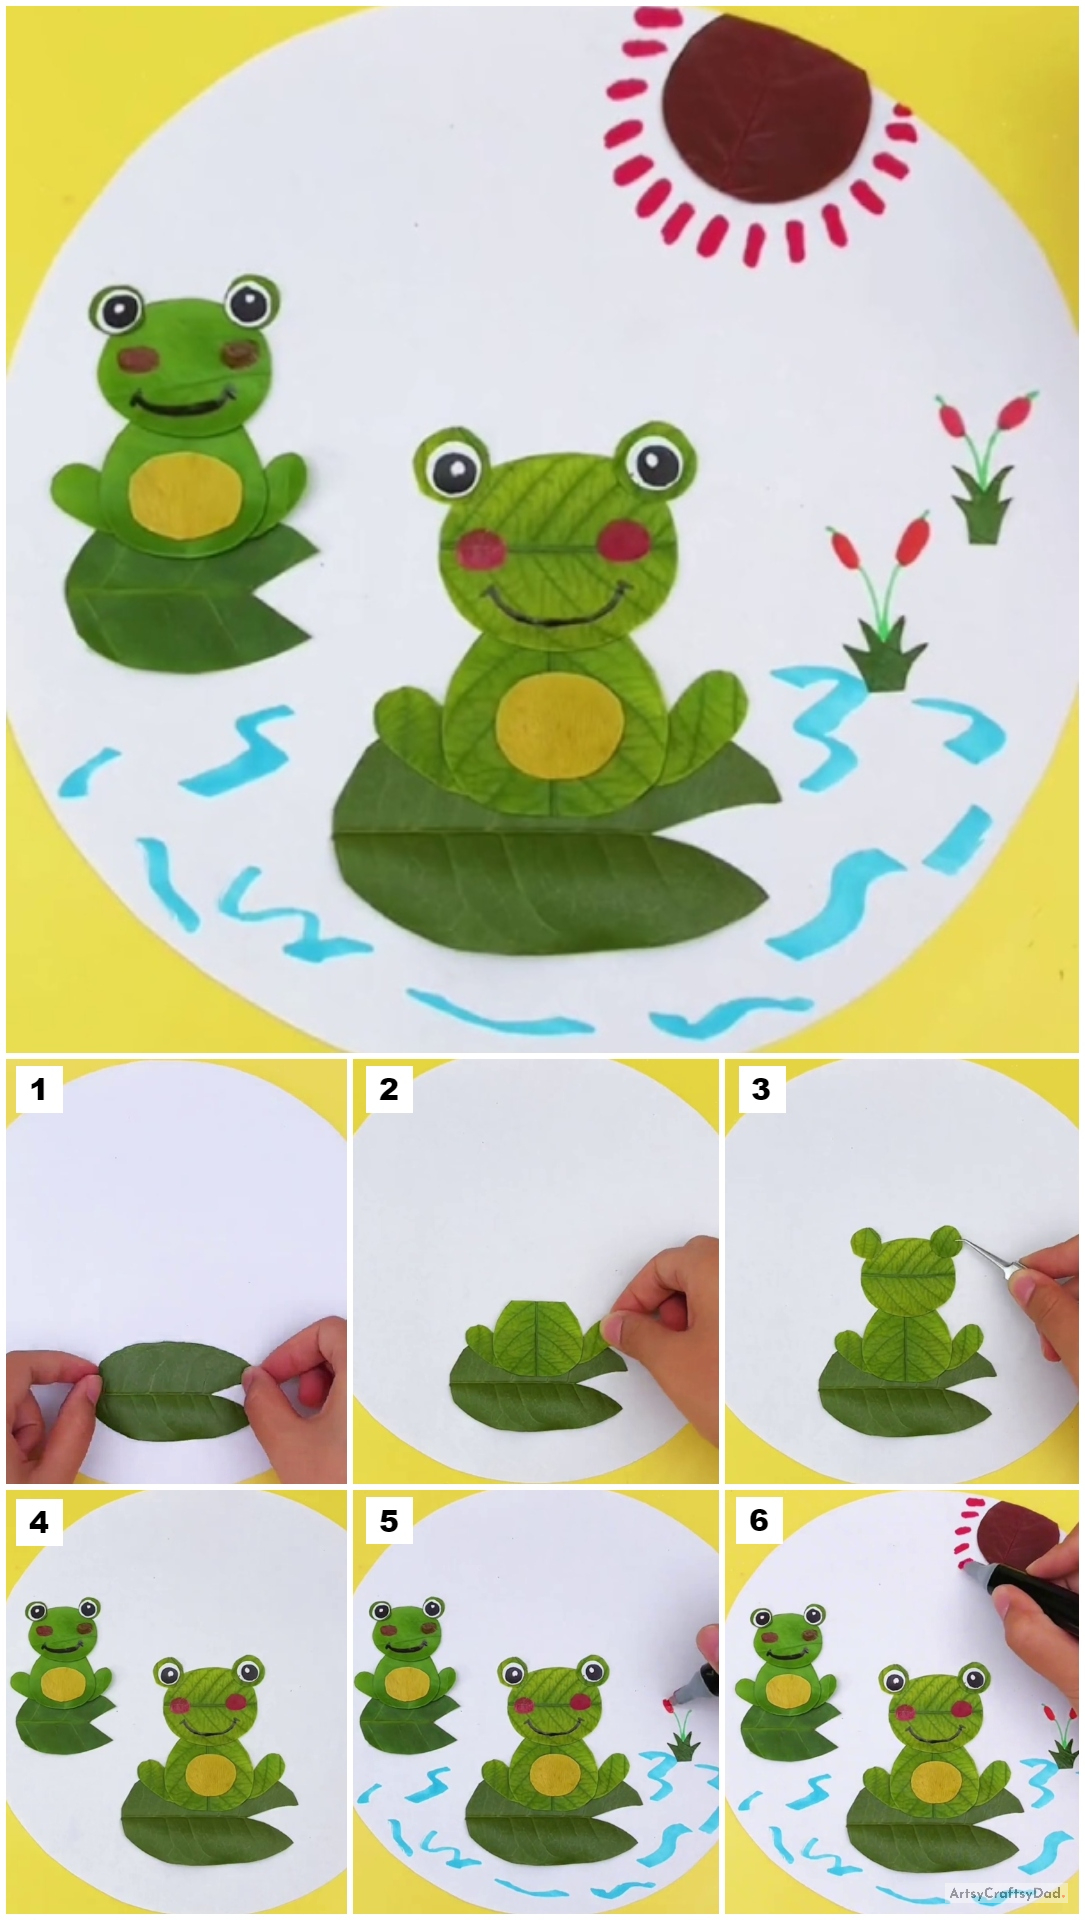 Leaf Frogs In Pond Scenery Craft Tutorial For Kids